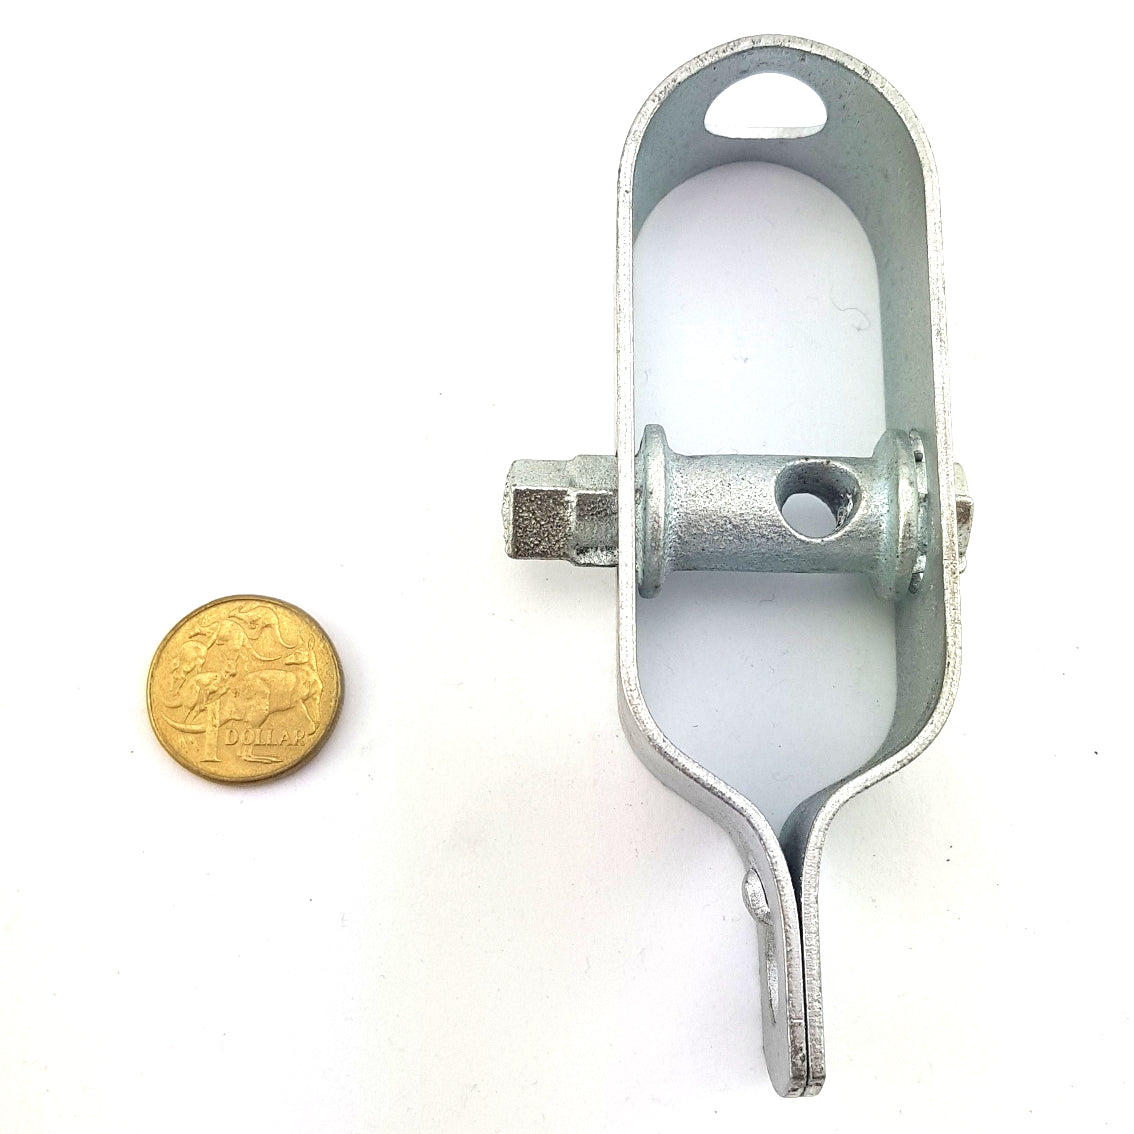 Galvanised wire tensioner. Balustrade Products. Melbourne, Australia.